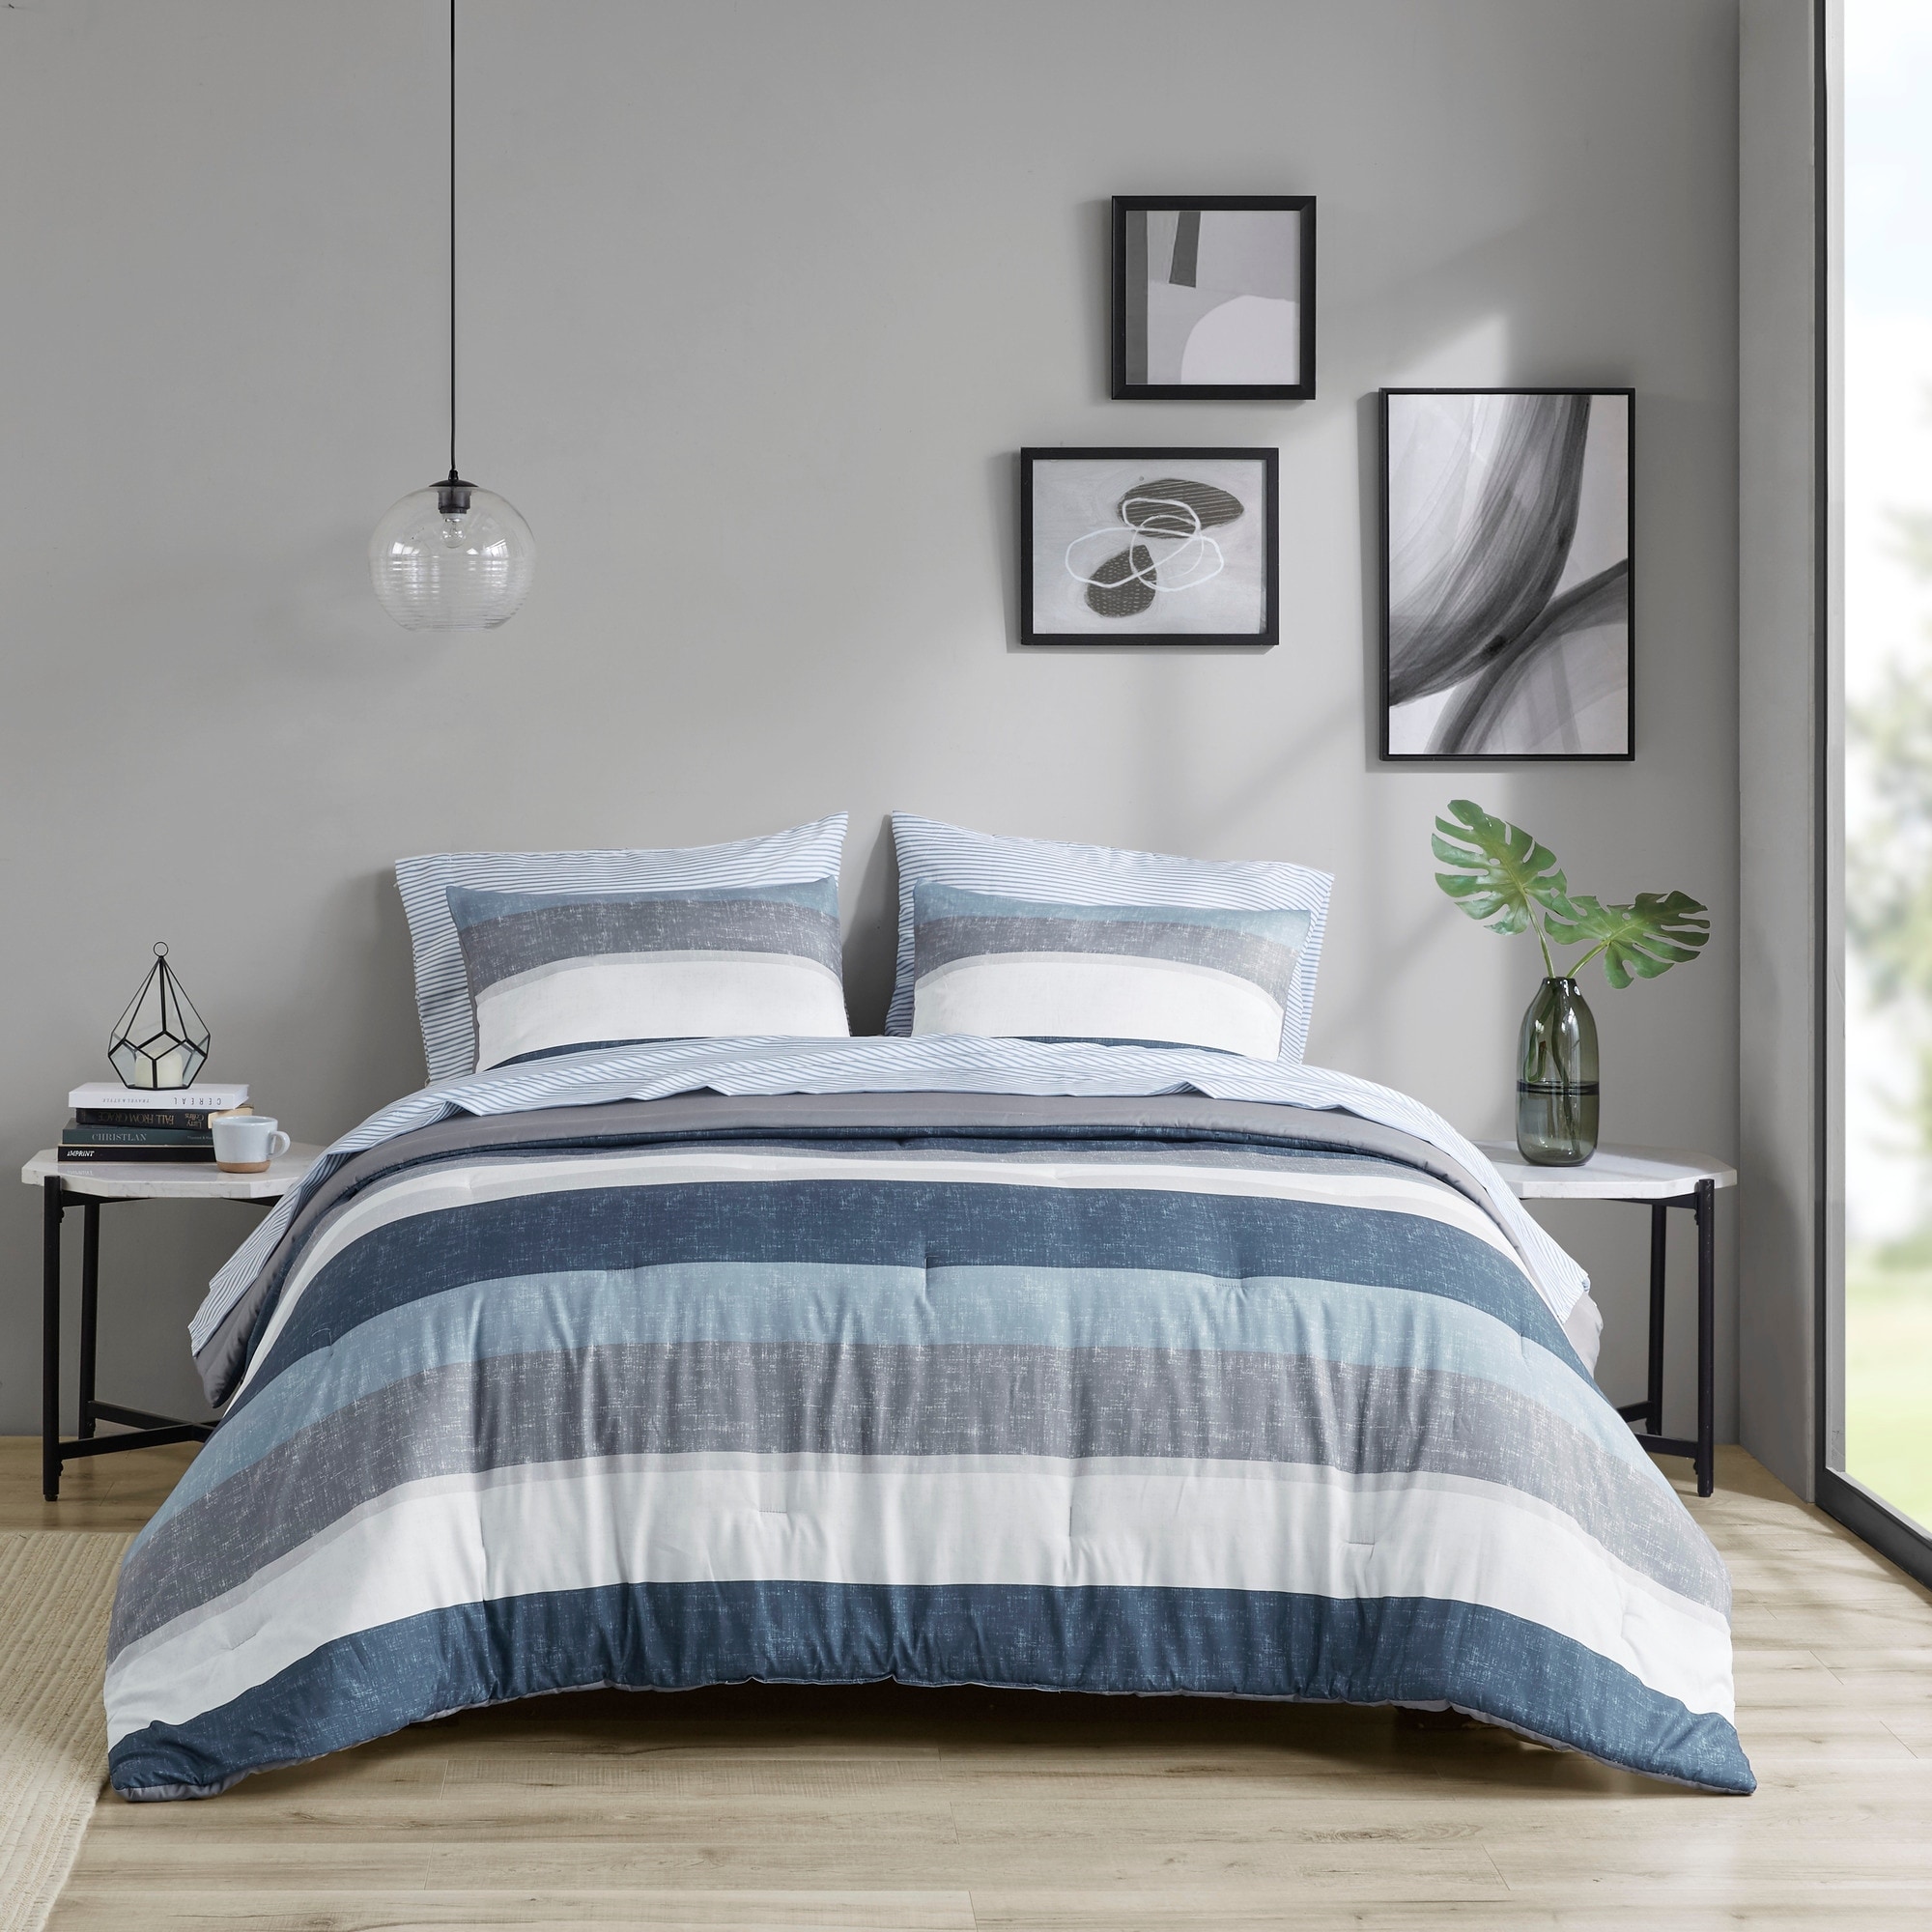 Andency Gray White Striped Reversible Comforter Set Queen Size